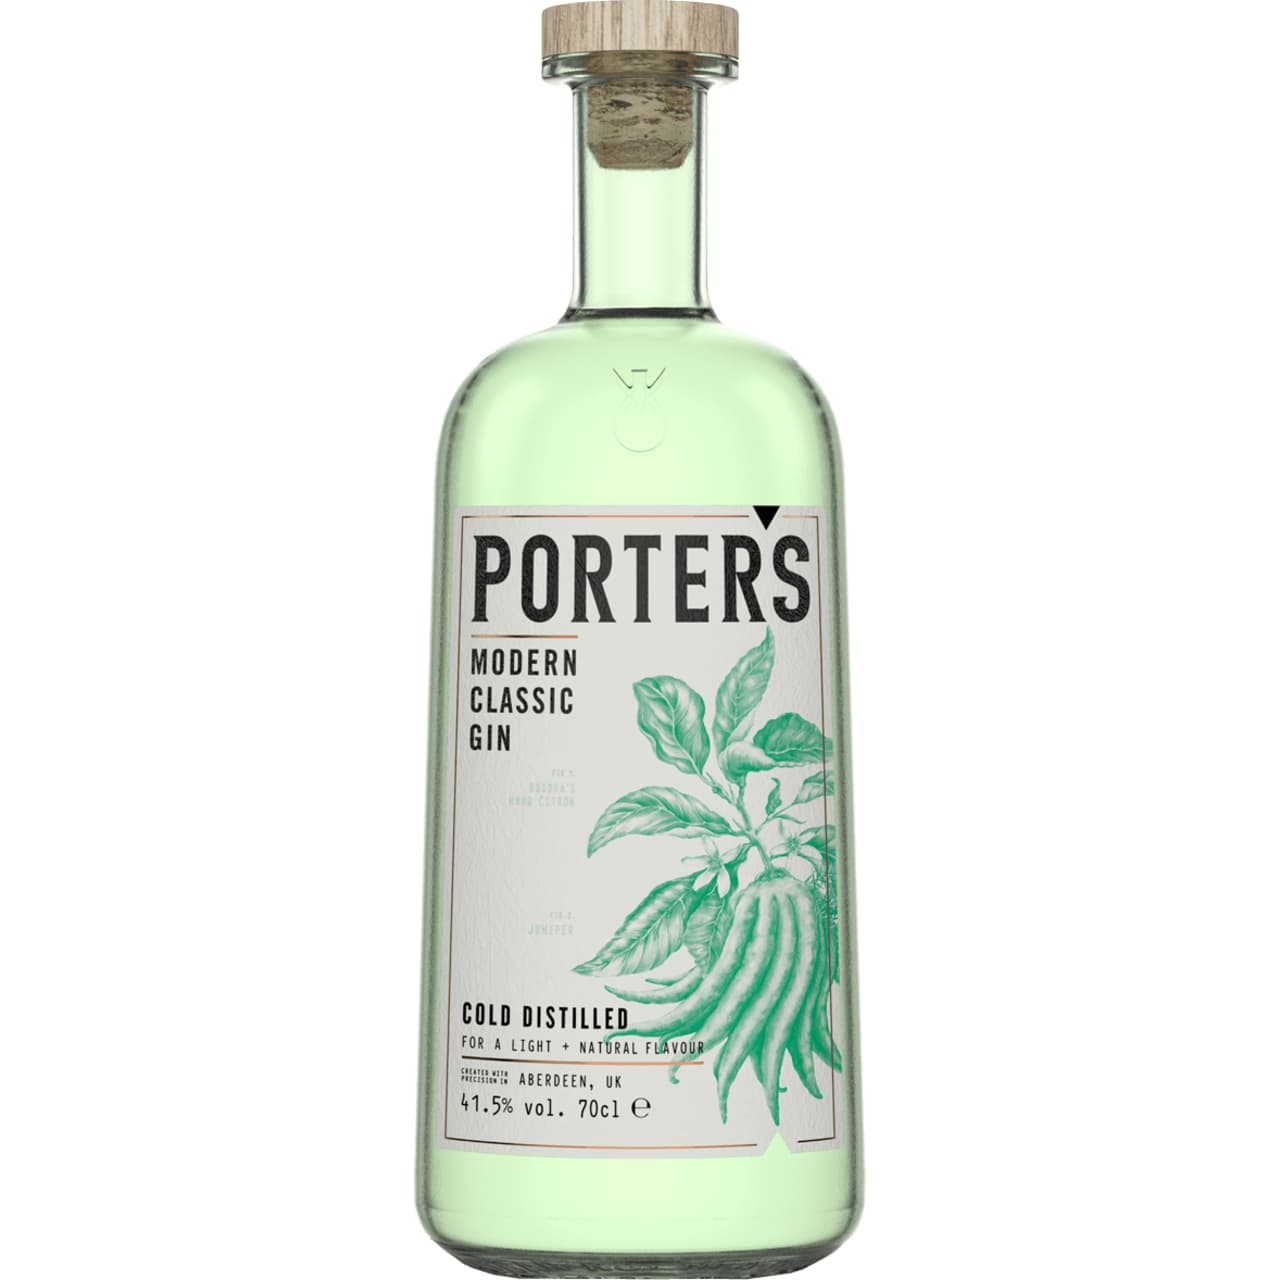 Unbound by convention, Porter's Gin is a fusion of modern and traditional distillation techinques.